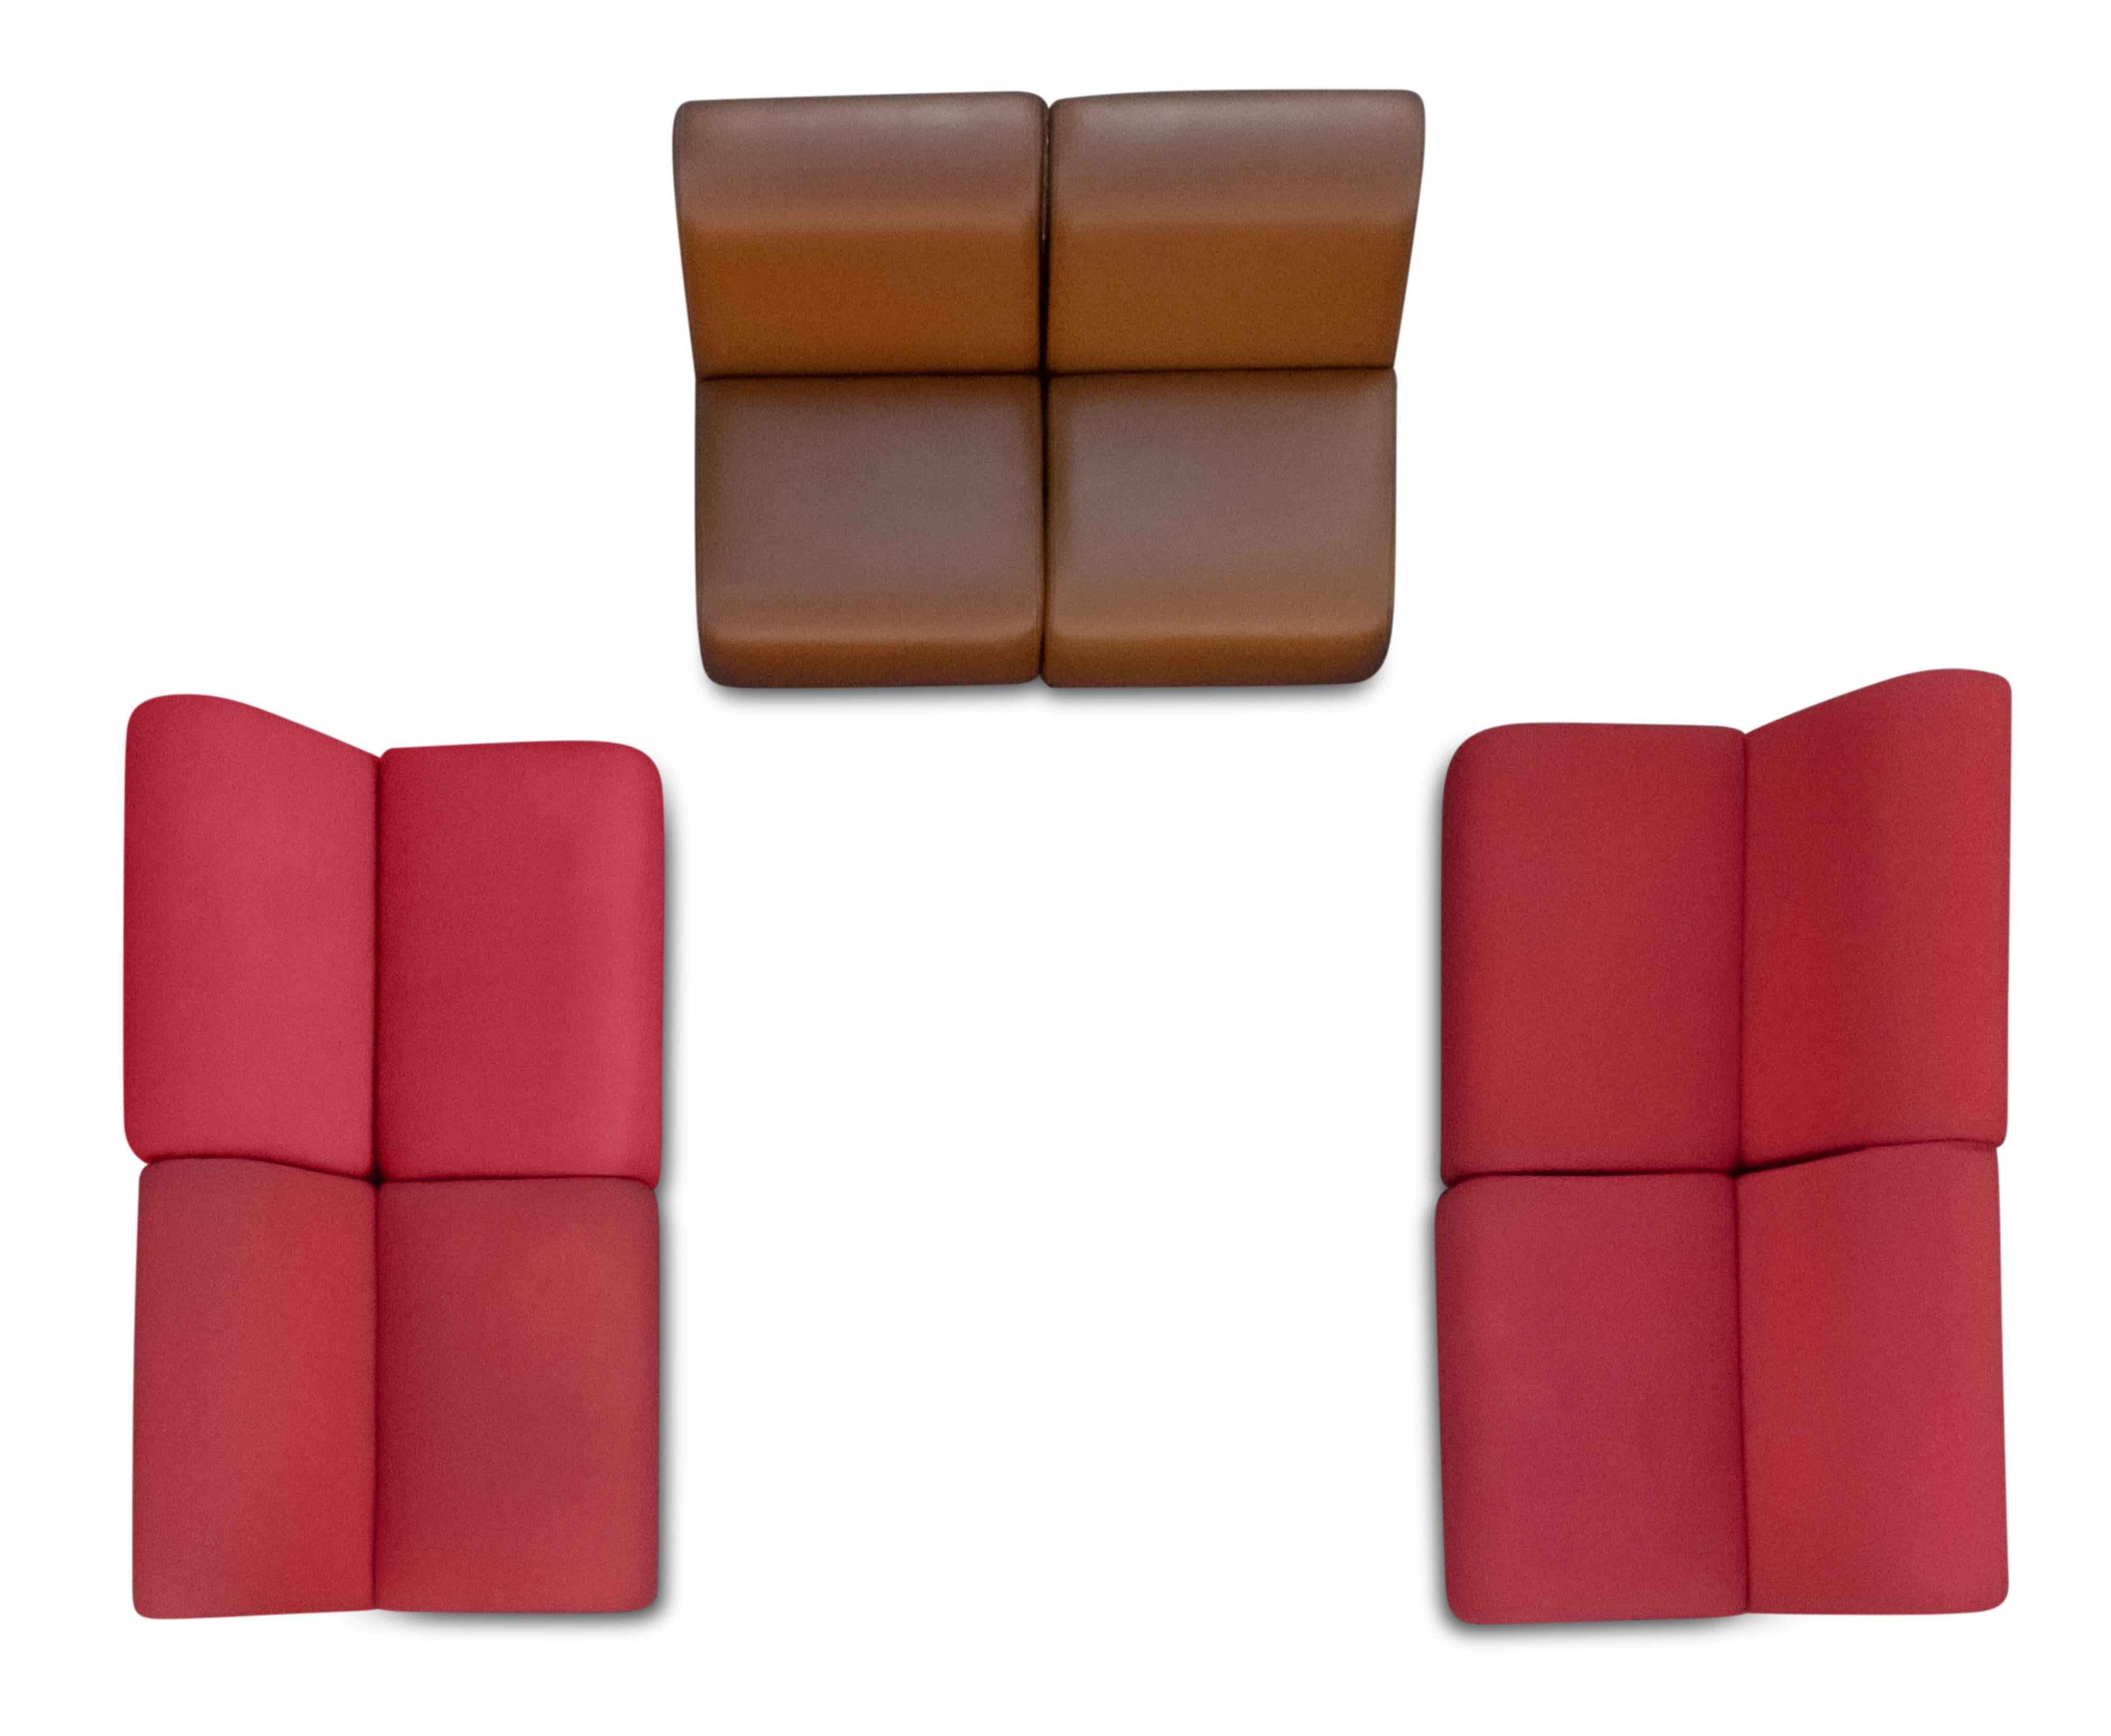 Space Age John Mascheroni 6 Piece Sectional Sofa for Vecta Contract Red & Brown Upholstery For Sale